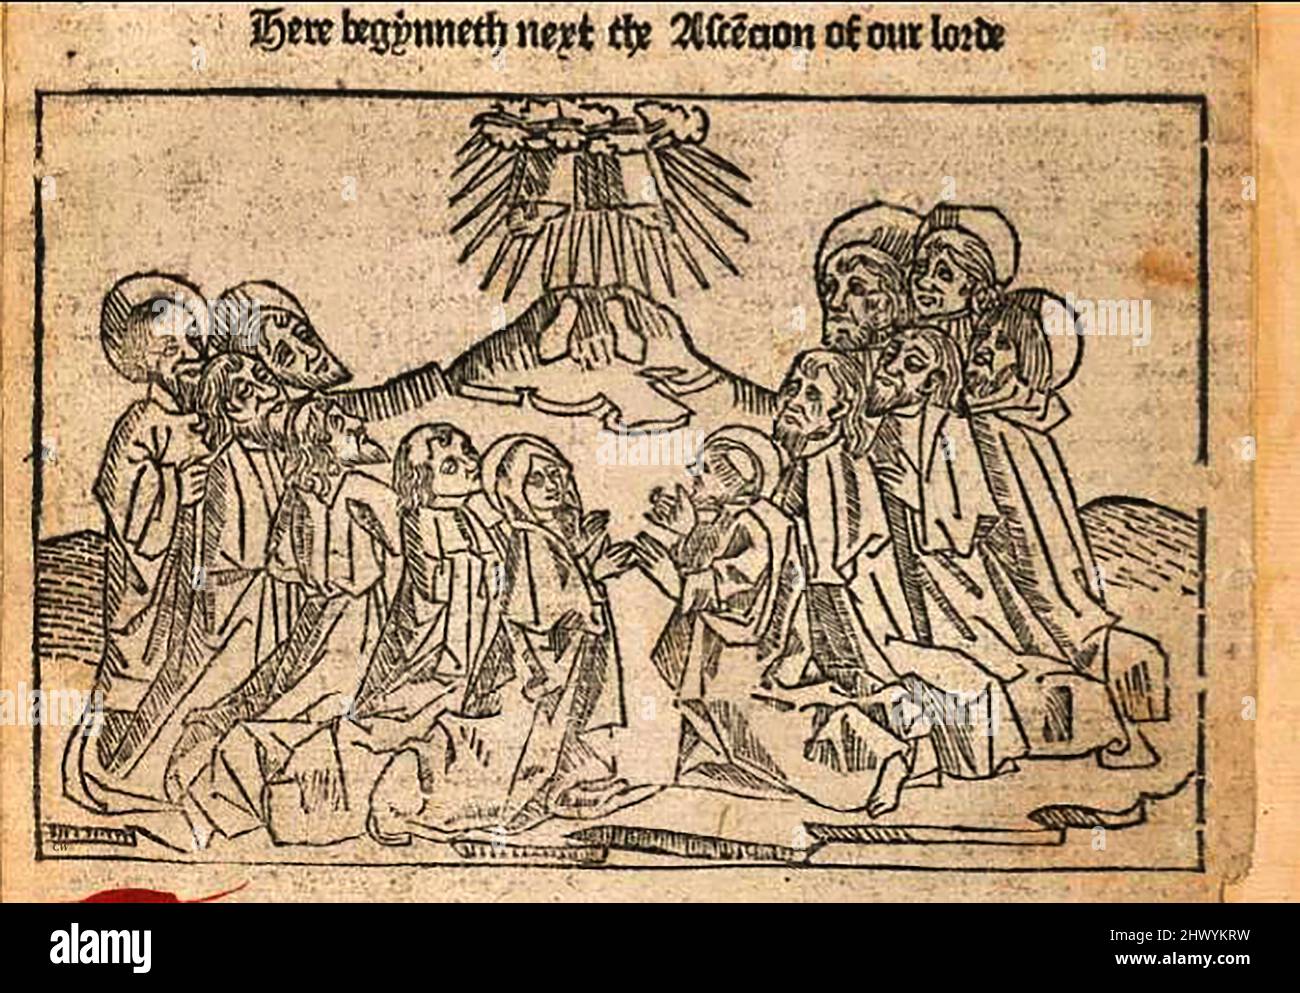 15th century woodcut showing the the ascension of Christ into heaven, printed by William Caxton ( 1422-1491/92) in his translation of  'The Golden Legend' or  'Thus endeth the legende named in Latyn legenda aurea that is to saye in Englysshe the golden legende' by Jacobus, de Voragine, (Circa 1229-1298). the Christian teaching that Christ physically departed from Earth by rising into Heaven, in the presence of eleven of his apostles. Stock Photo